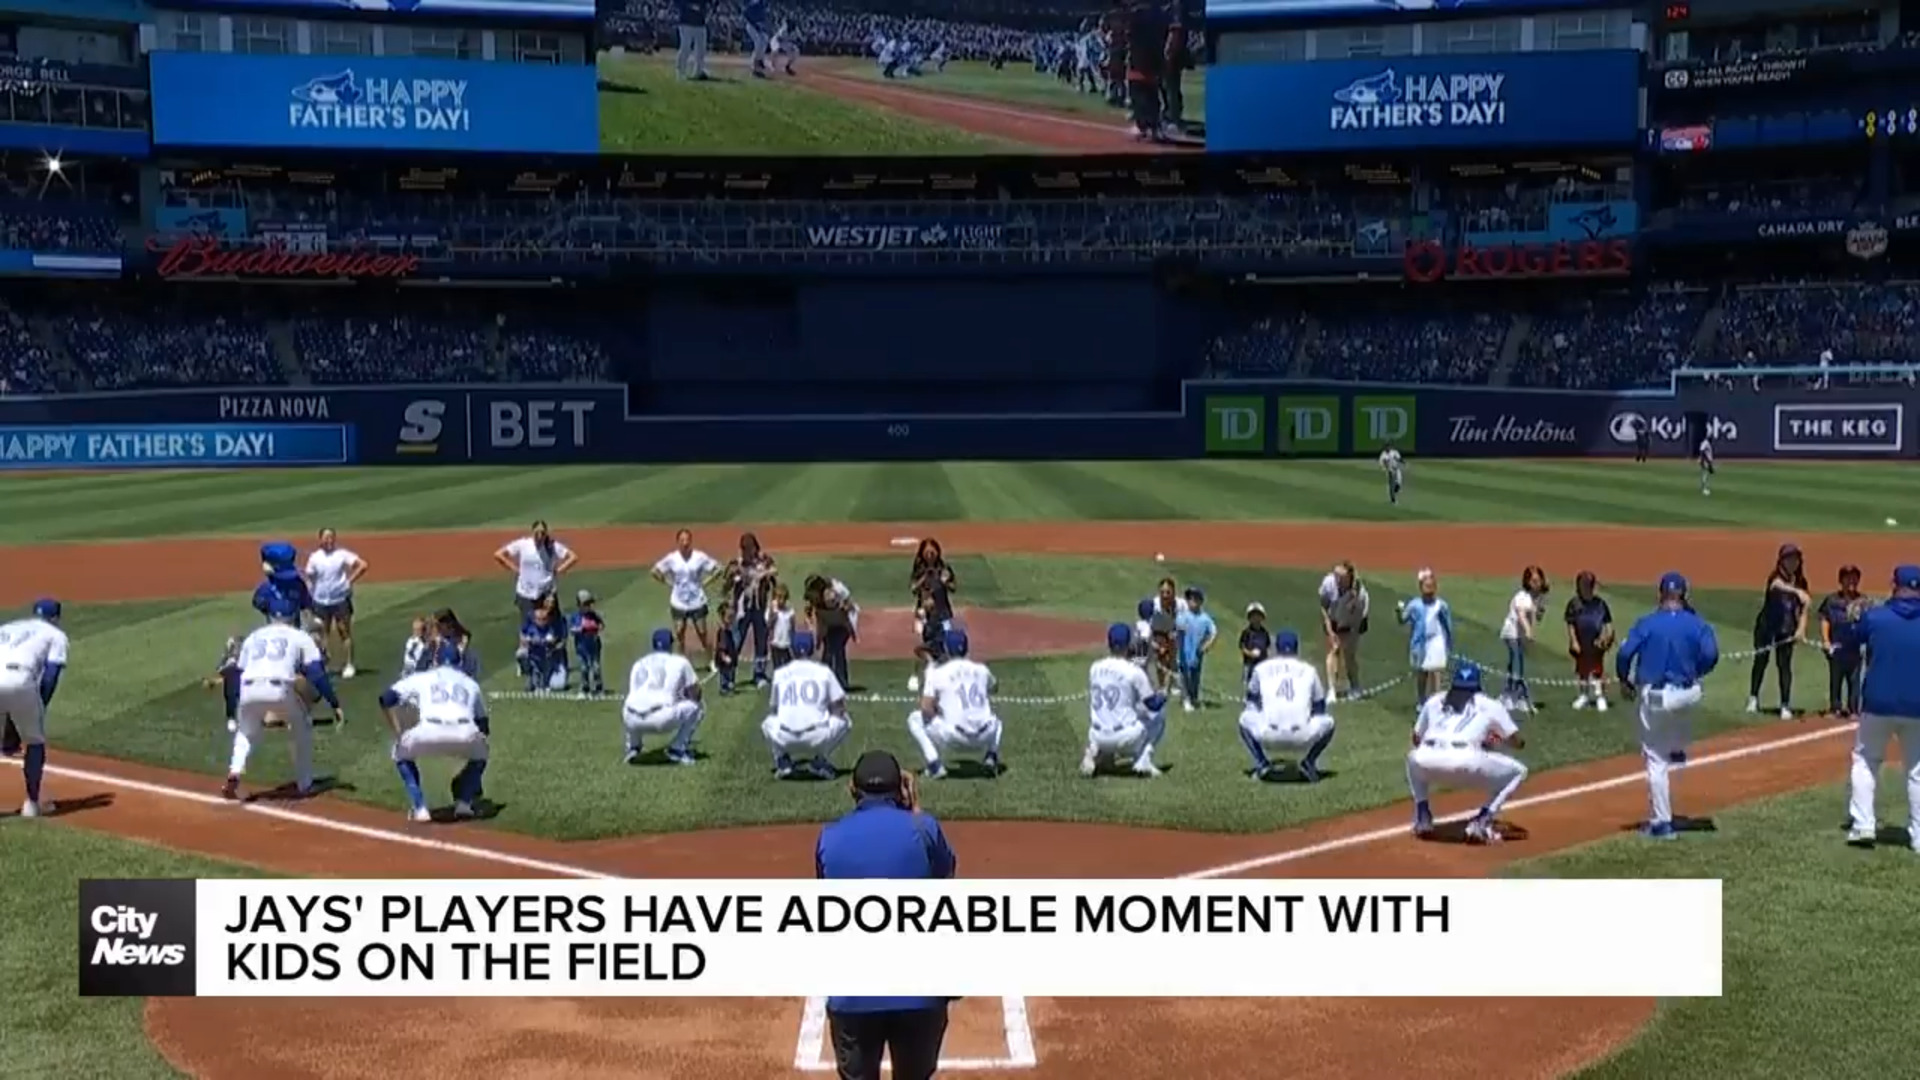 Toronto Blue Jays players have viral moment on field with kids